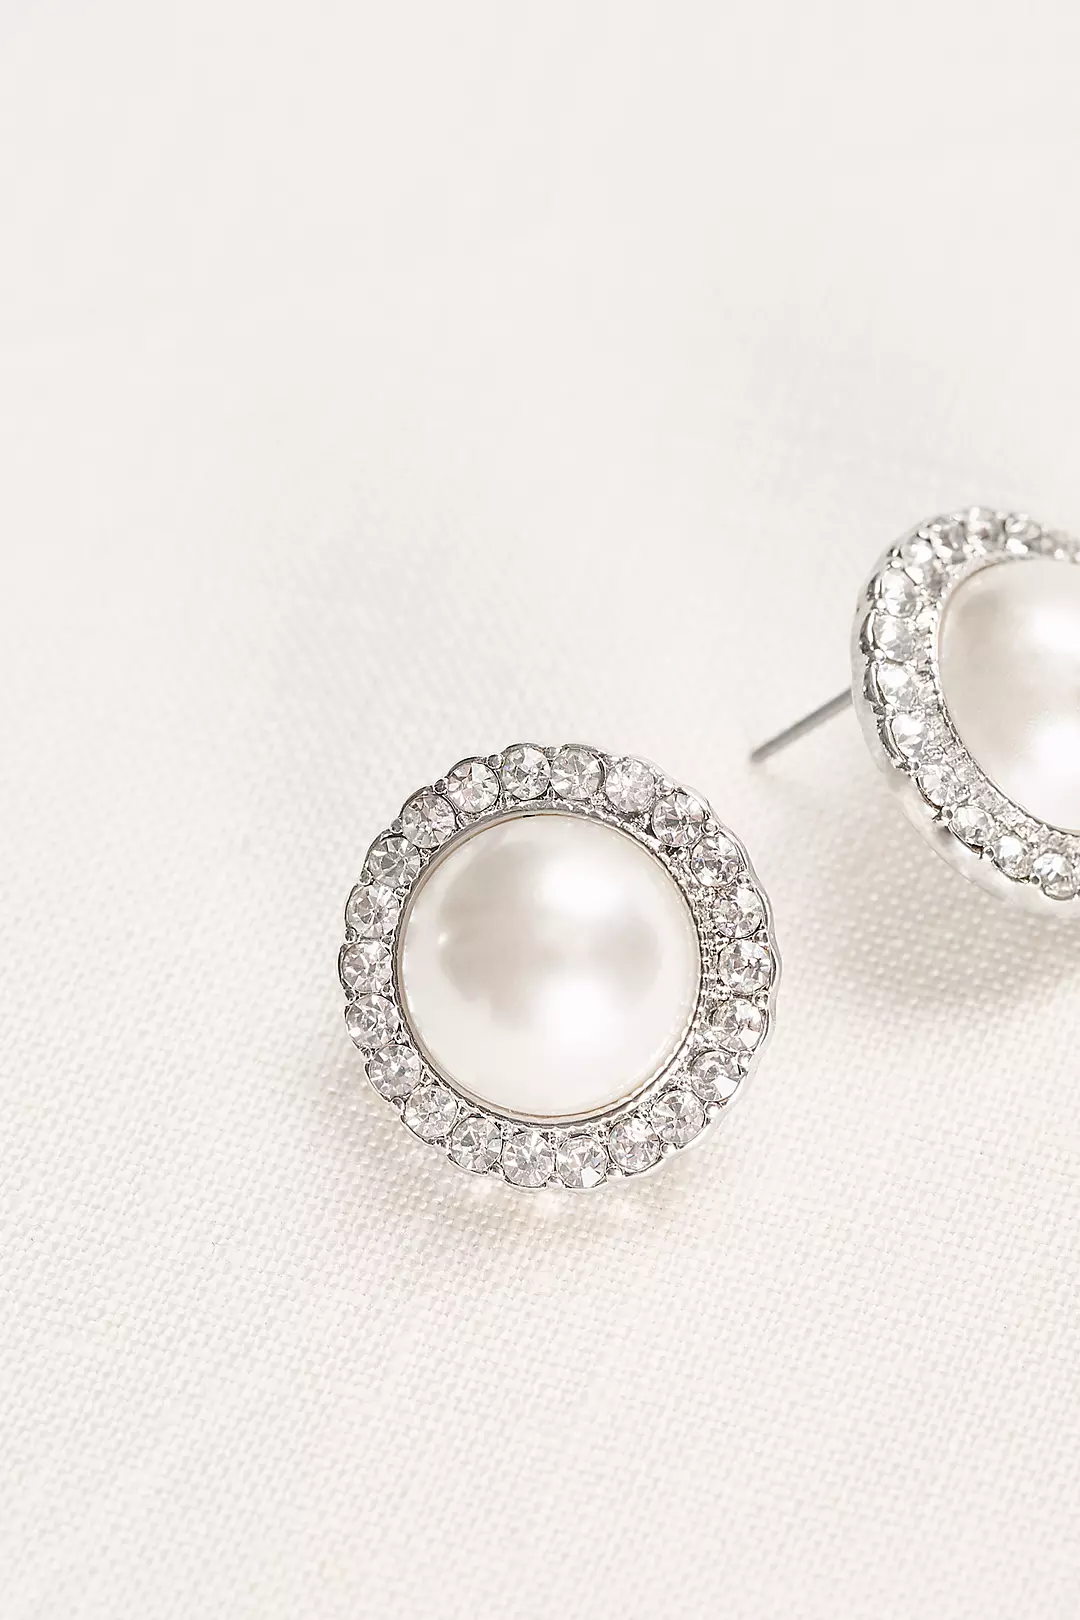 Pearl and Pave Button Earrings Image 2